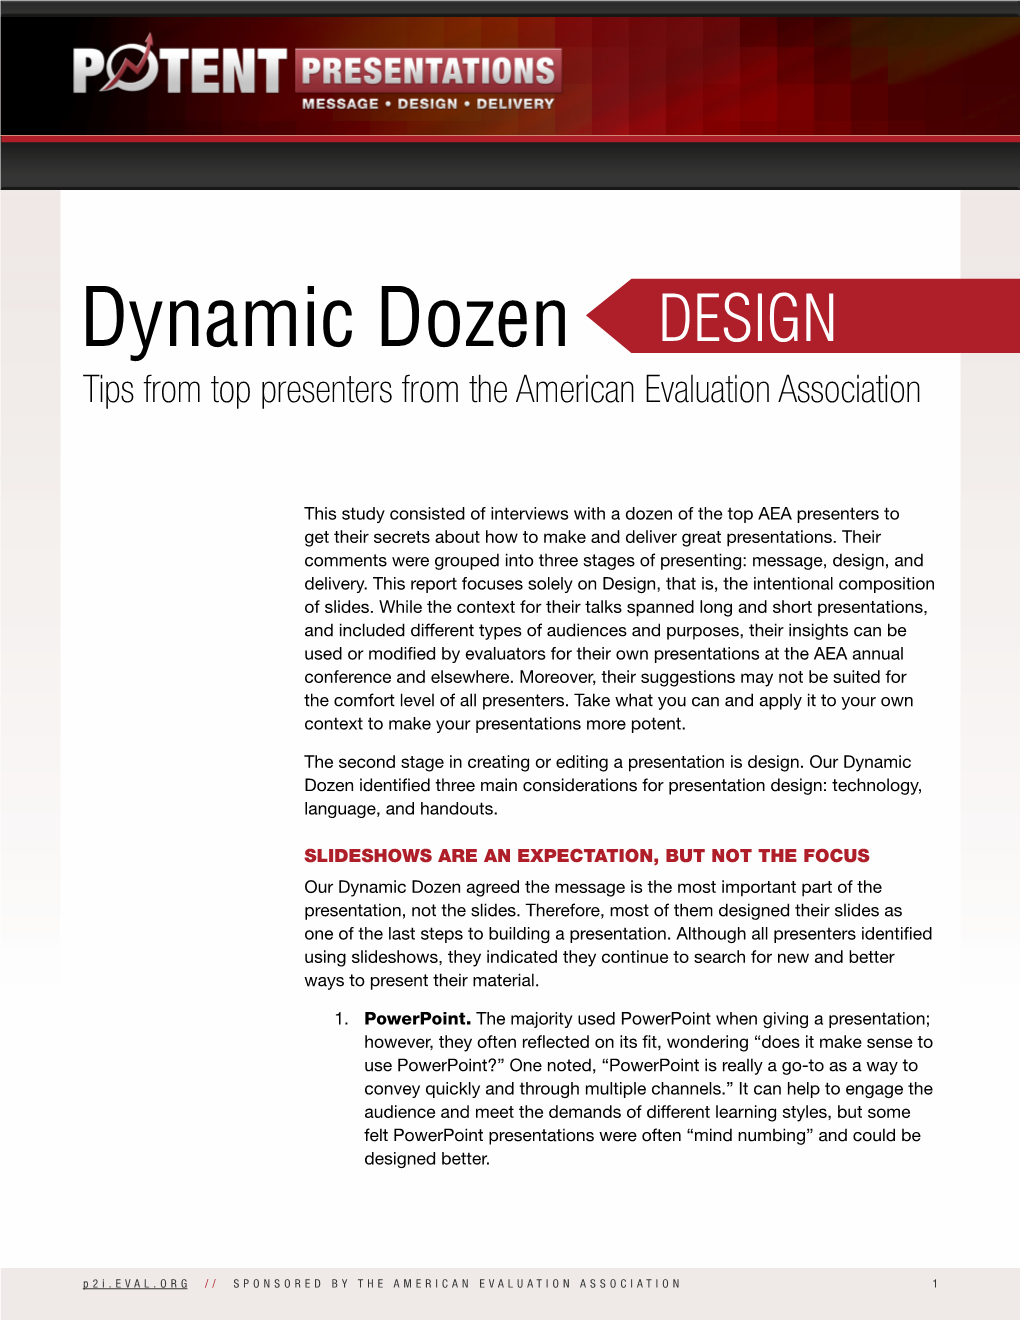 Dynamic Dozen Design Tips from Top Presenters from the American Evaluation Association